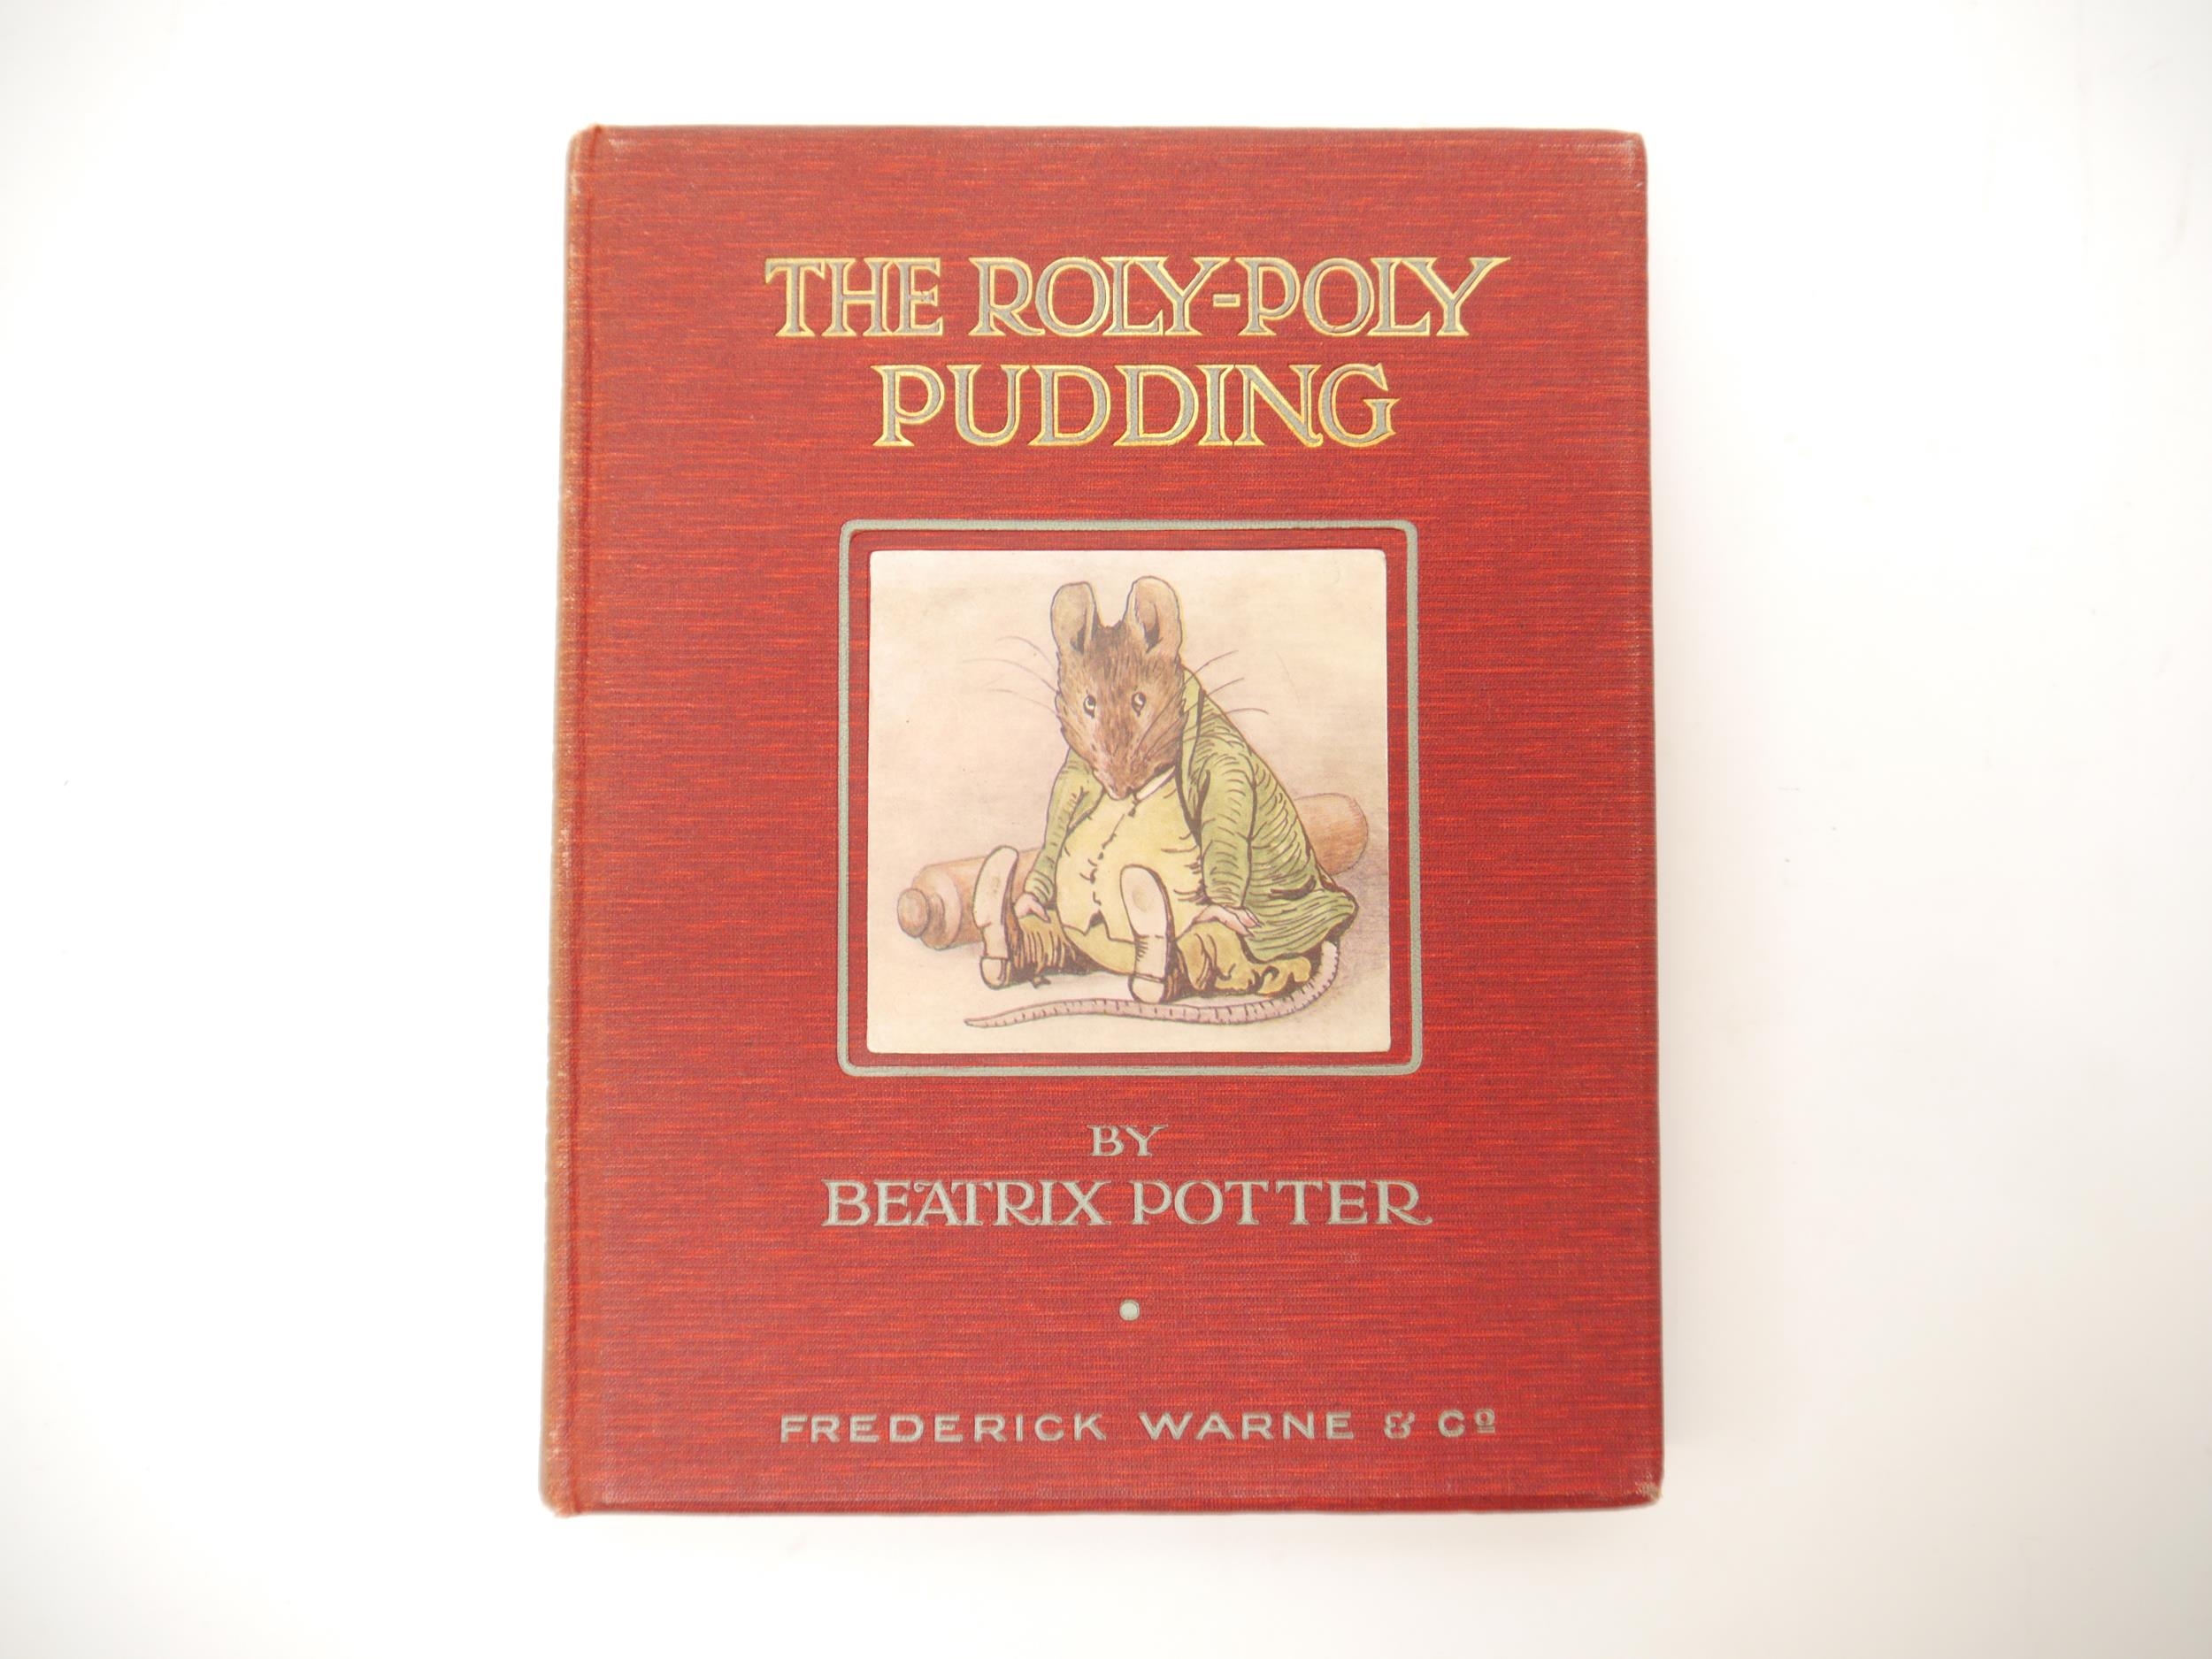 Beatrix Potter: 'The Roly-Poly Pudding', London, Frederick Warne, 1908, 1st edition, 1st issue (